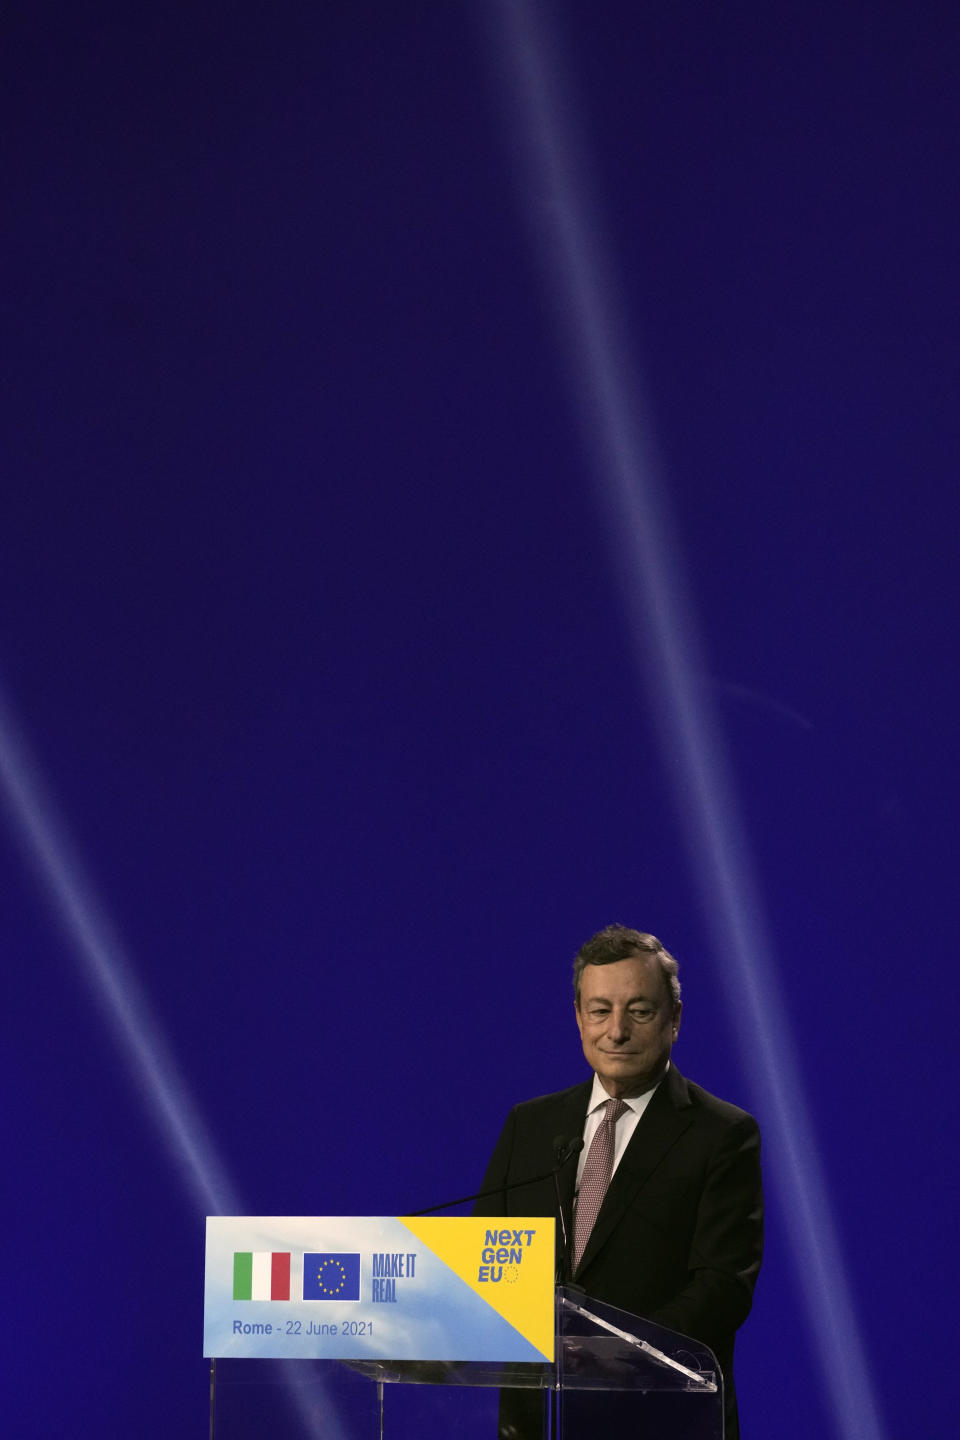 Italian Premier Mario Draghi speaks to the media during a joint news conference with European Commission President Ursula von der Leyen, at the Cinecitta' studios in Rome, Tuesday, June 22, 2021. (AP Photo/Andrew Medichini)